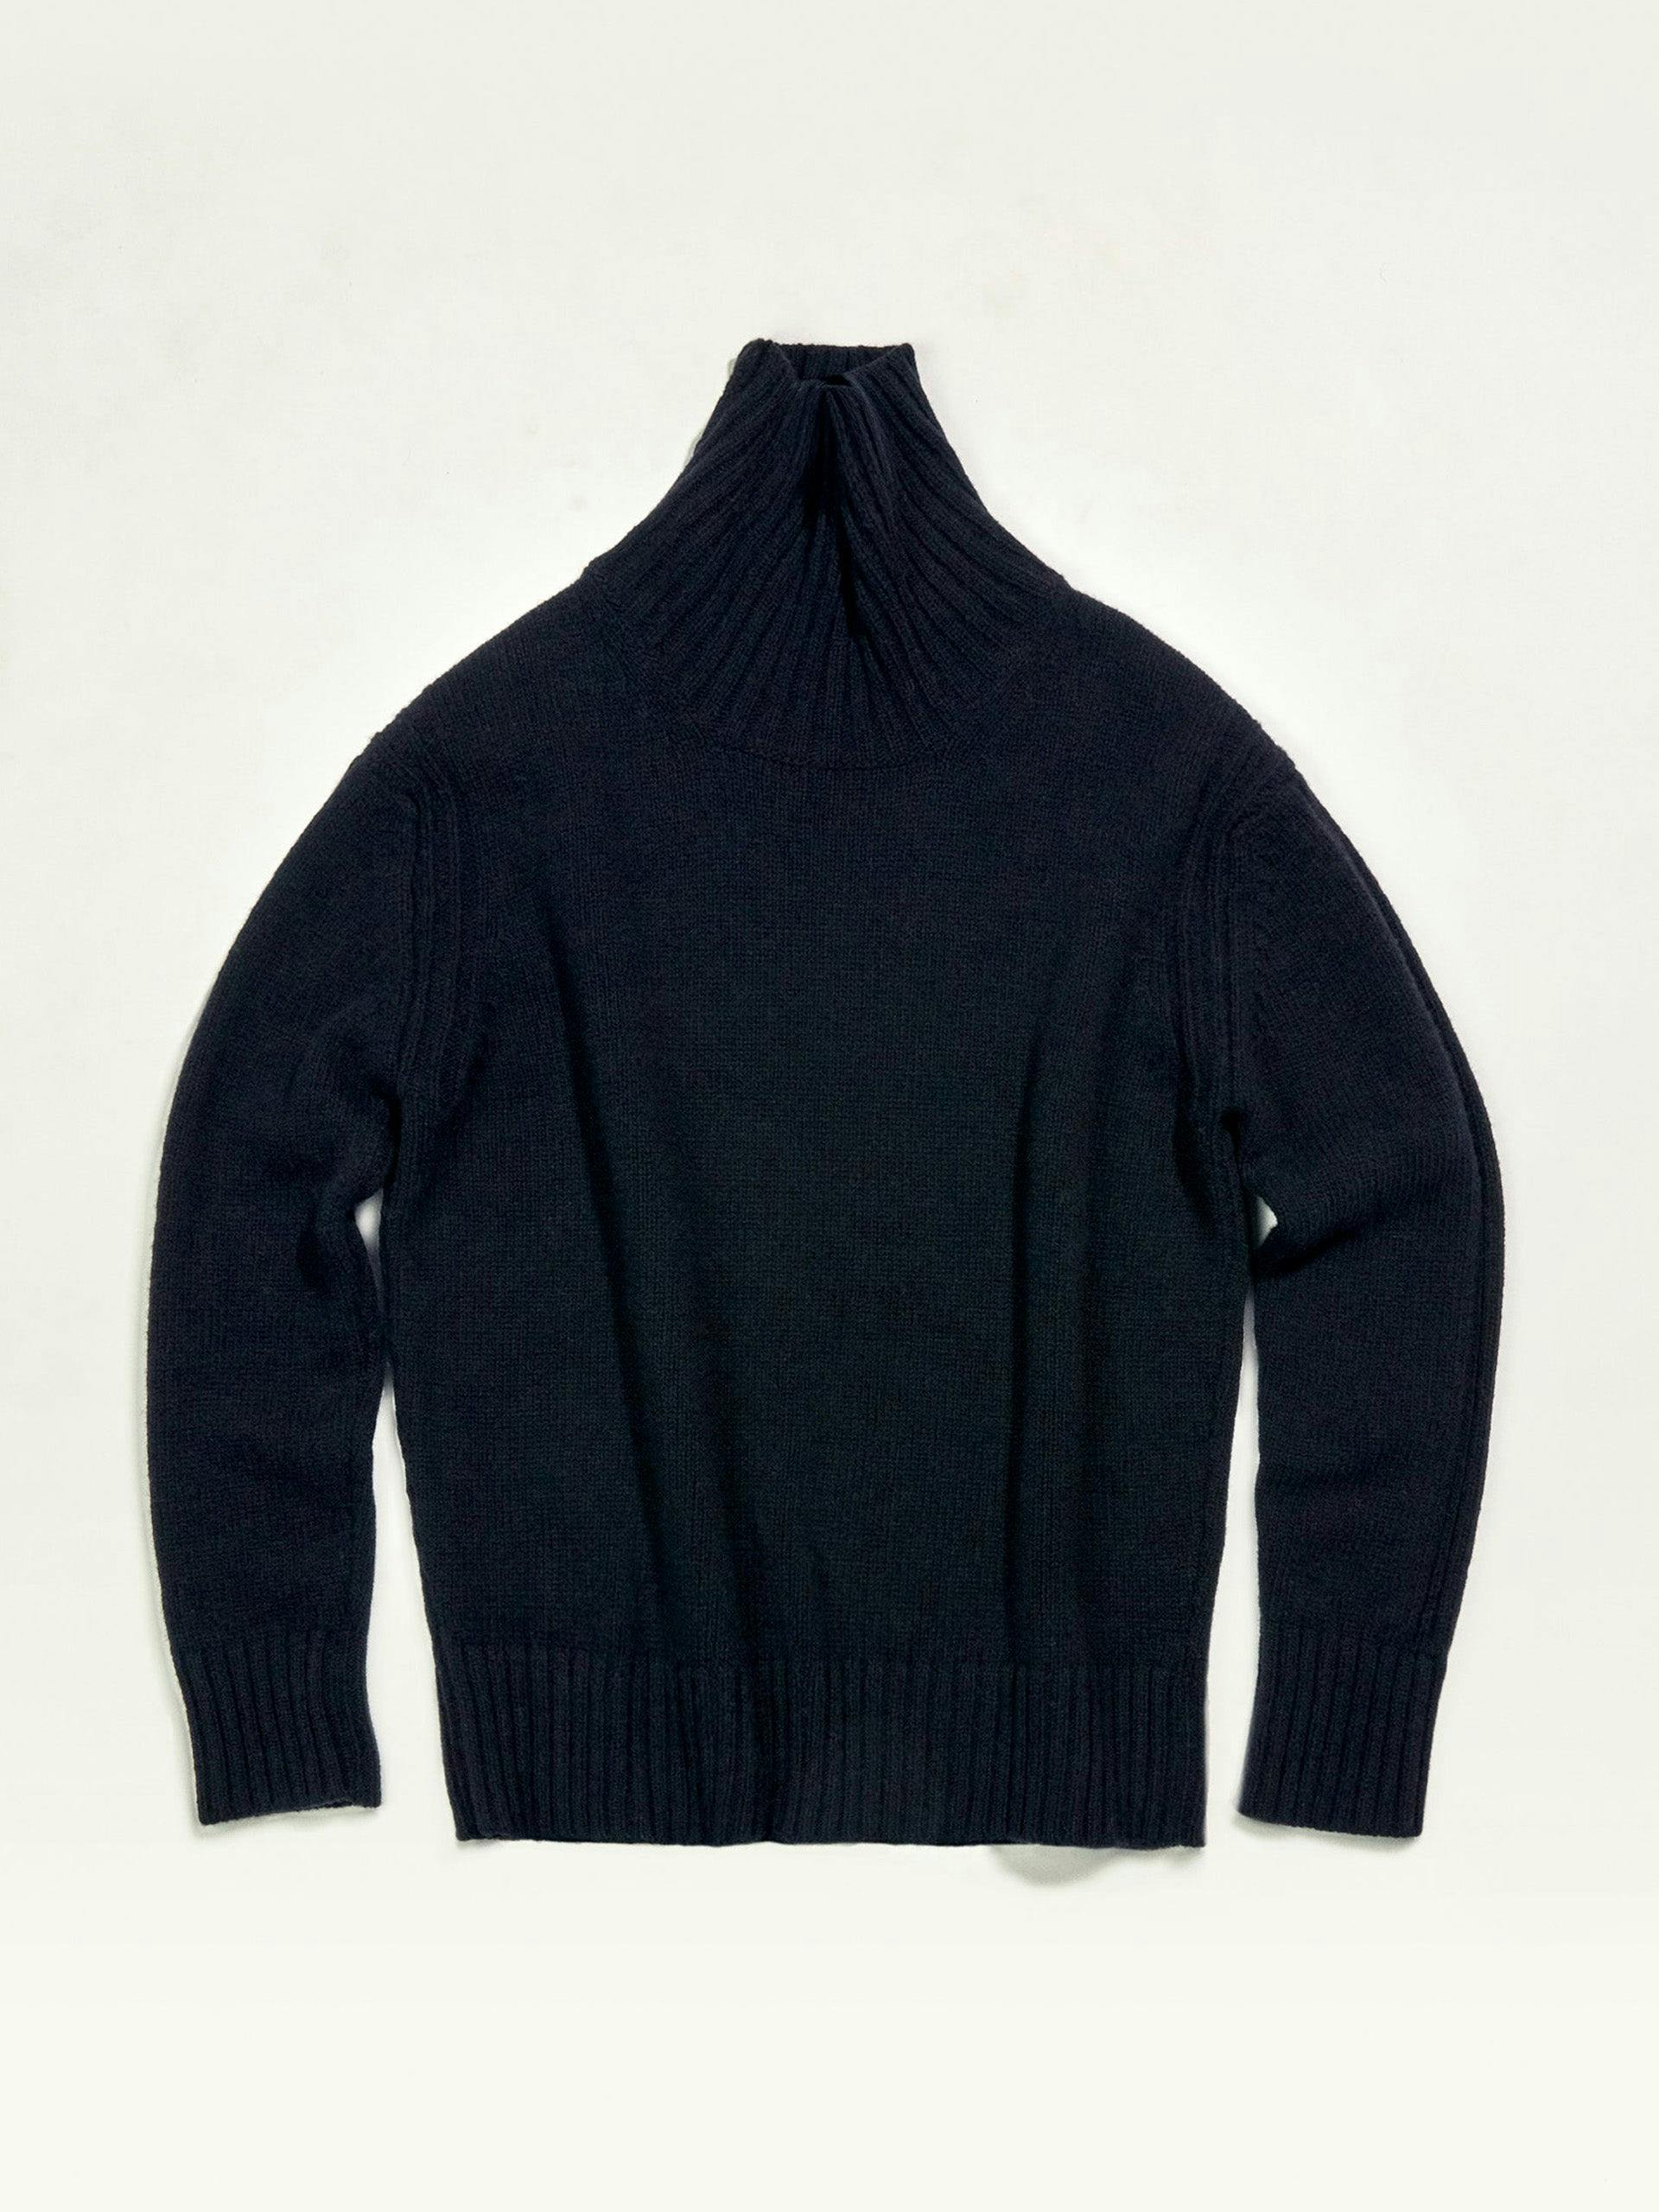 Navy Fintra Lambswool tunic knit